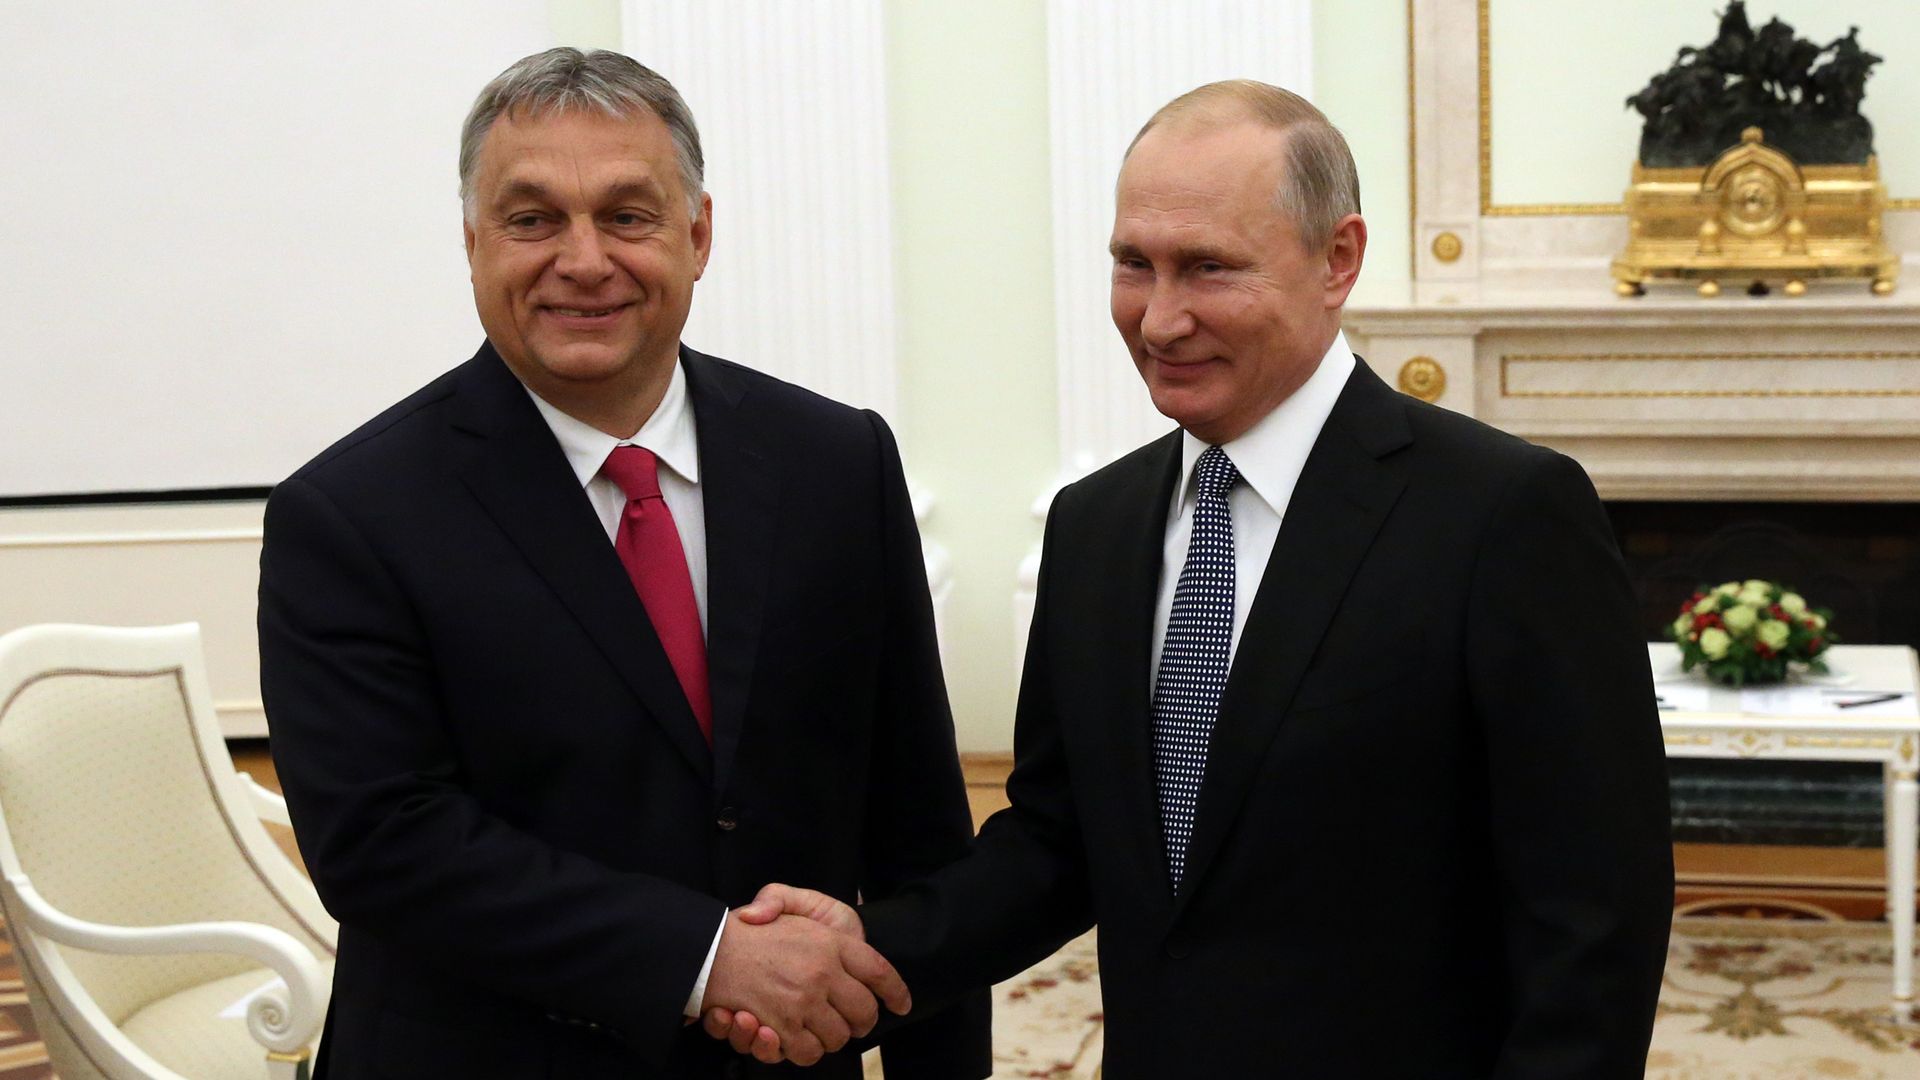 Hungarian President shaking hands with Russian President Putin